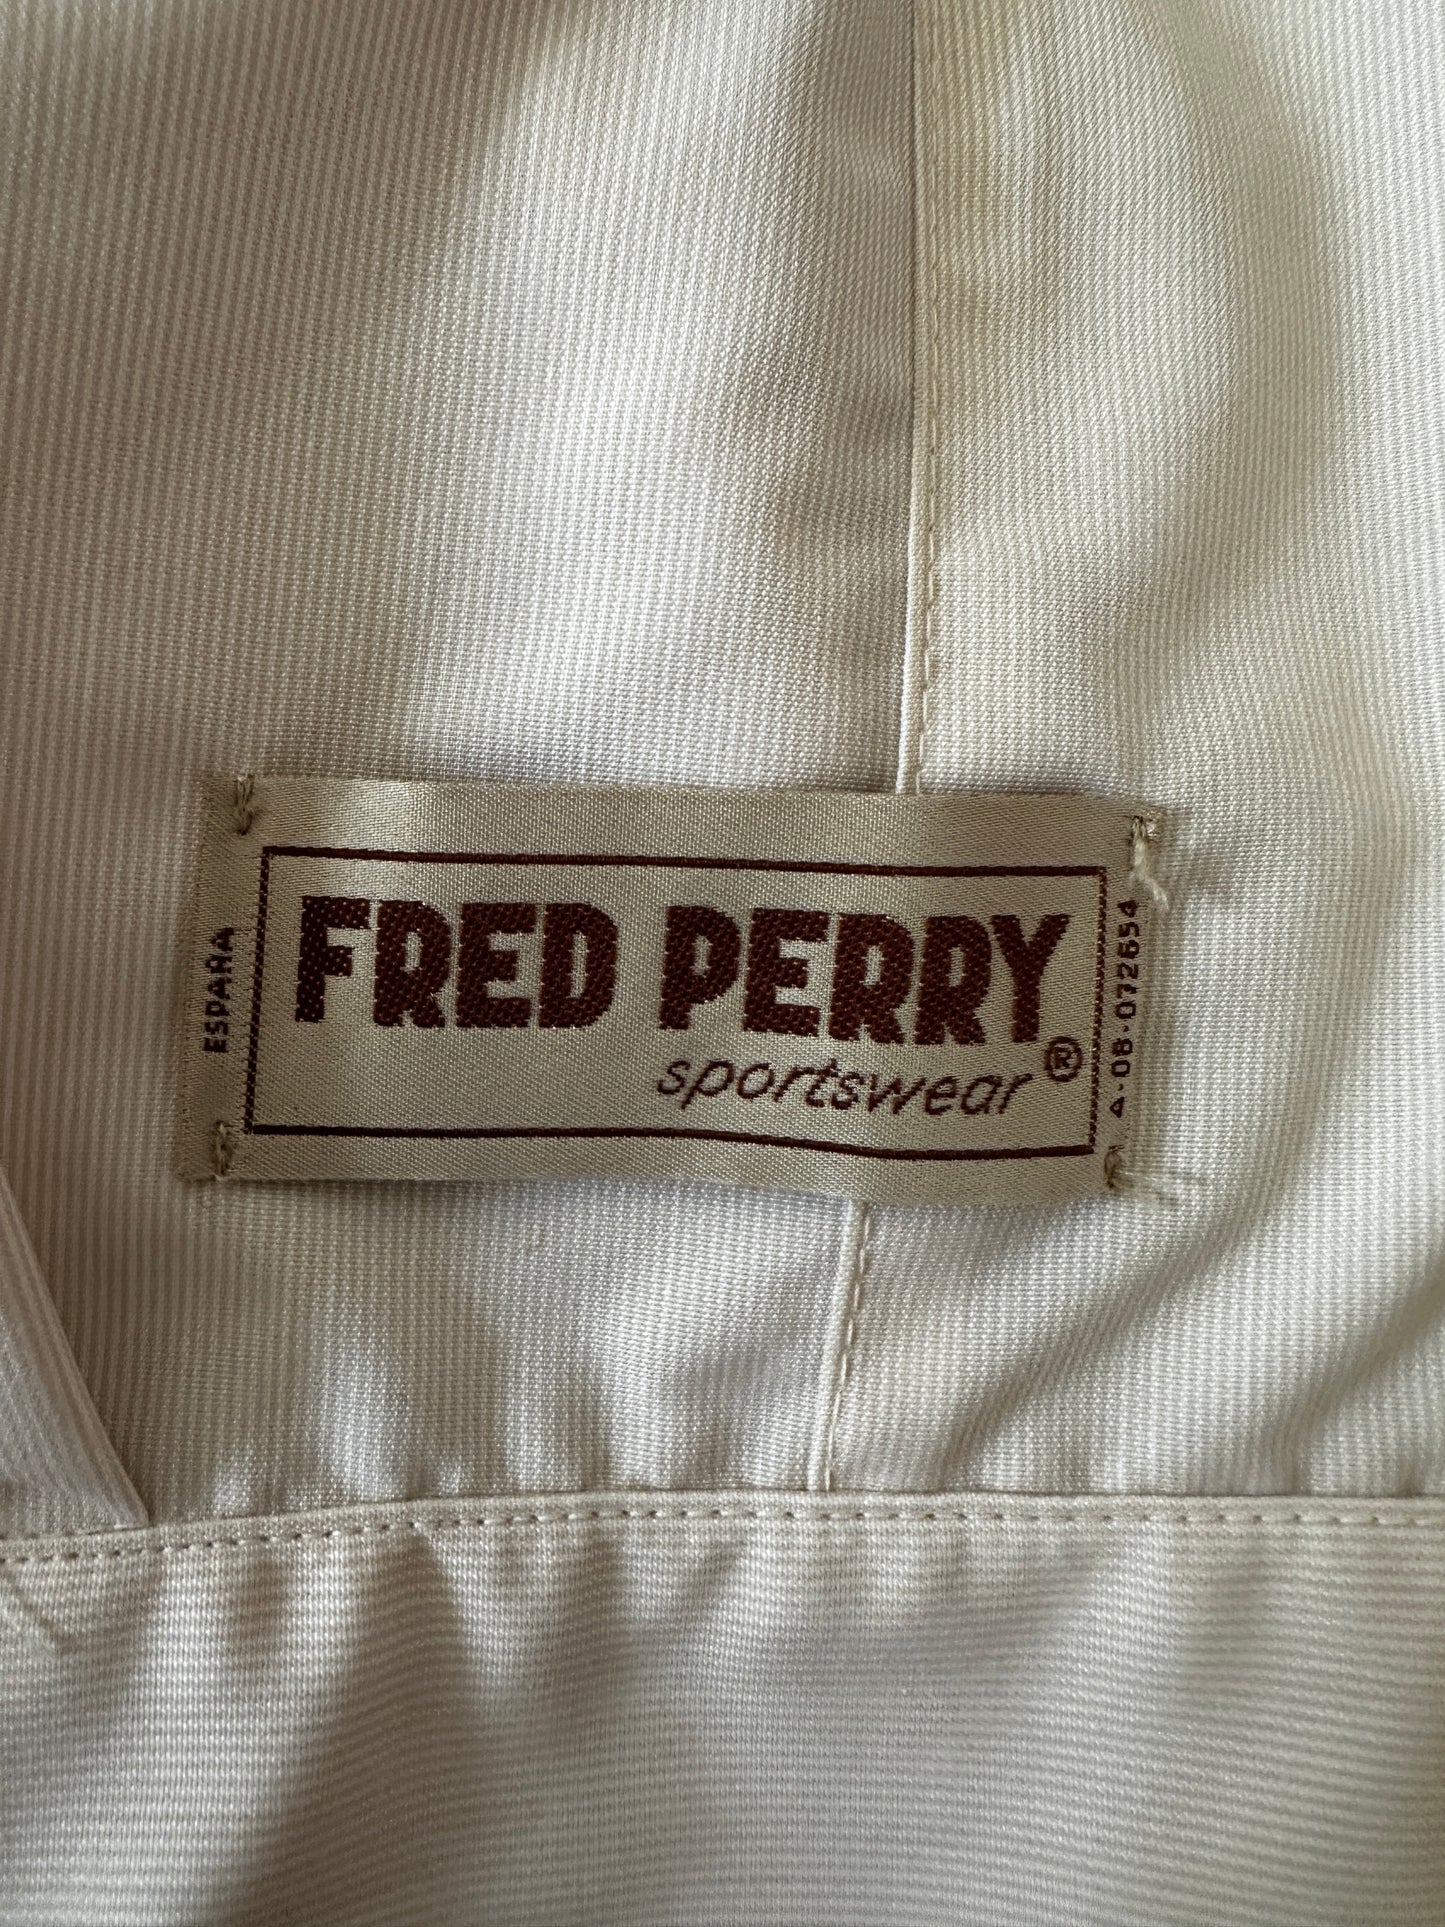 Fred Perry Vintage 80s Overshirt - Deadstock - XL / 56 - Made in Spain